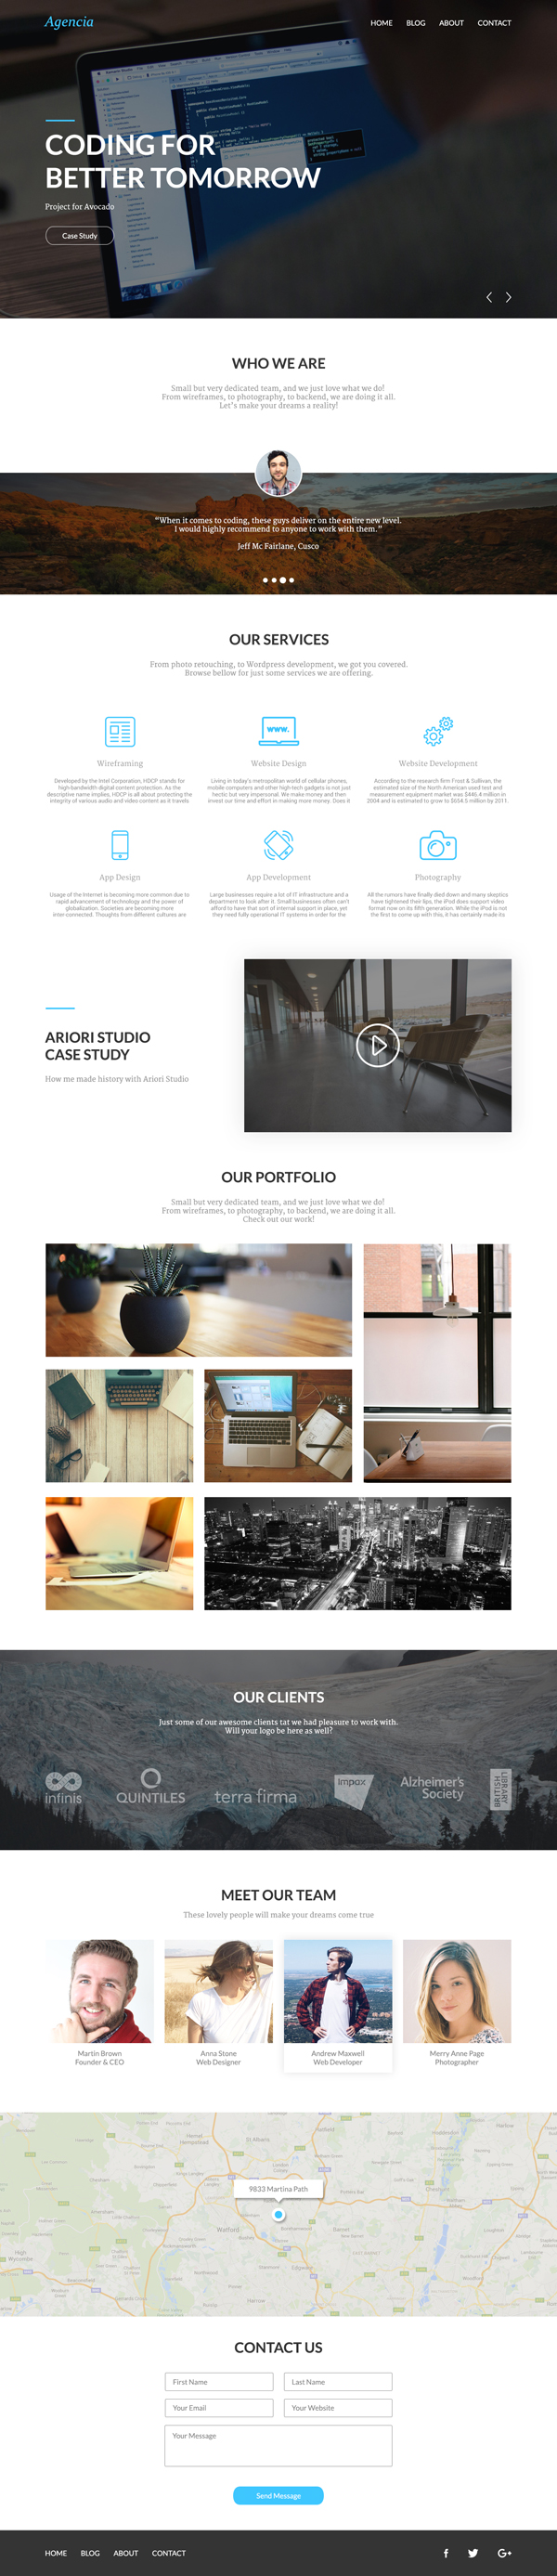 Agencia - FREE One Page PSD Template